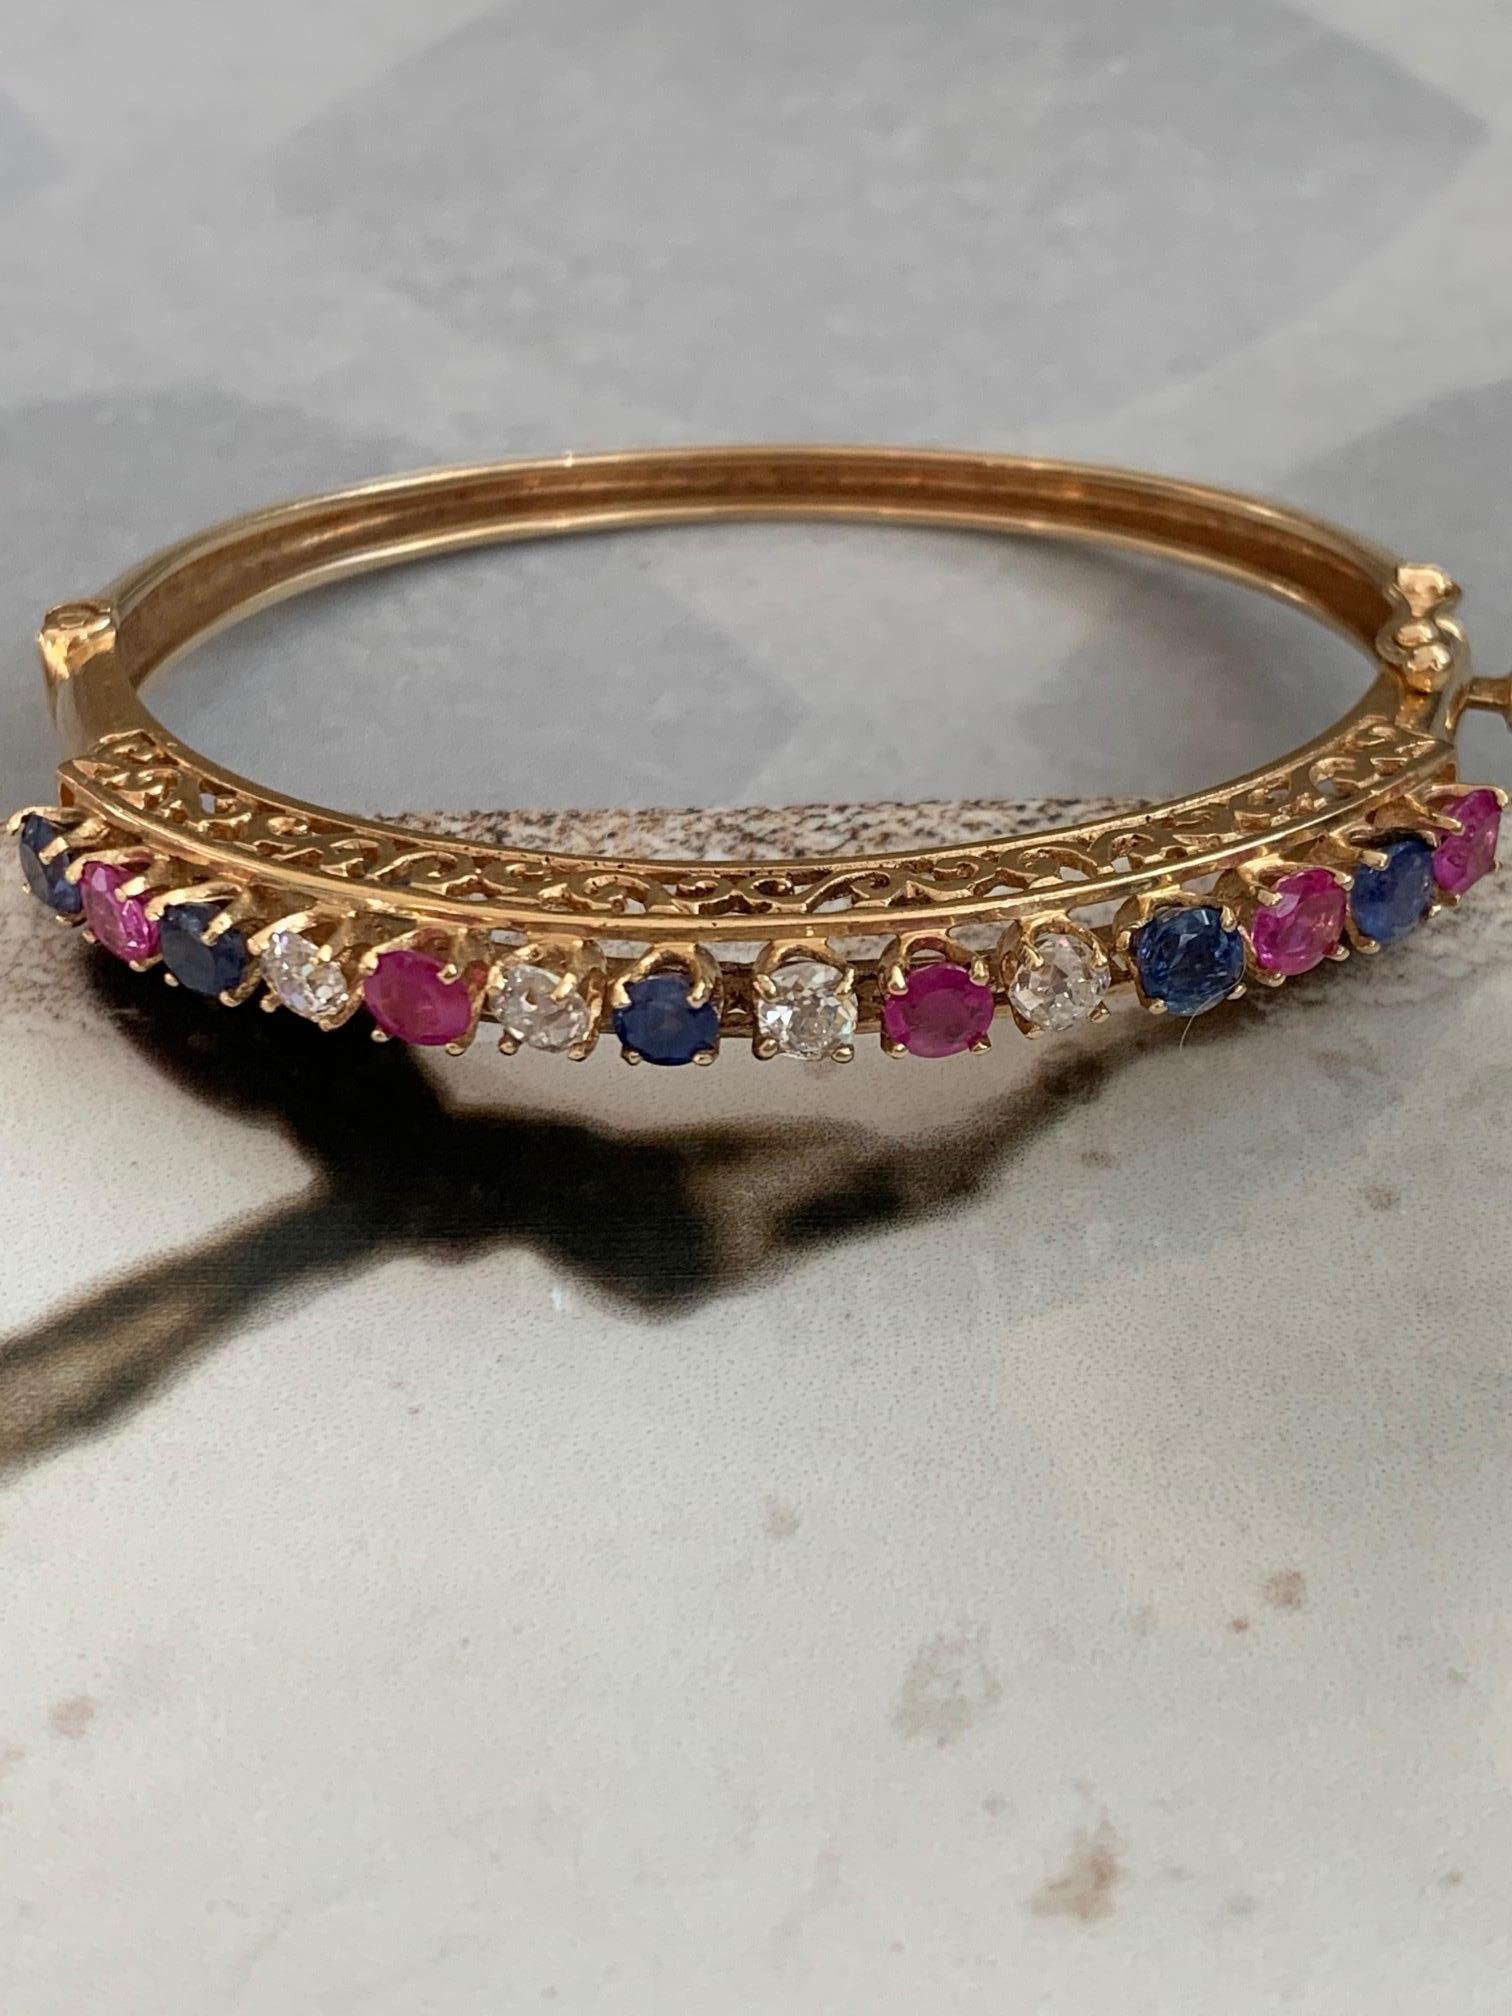 Diamond, Sapphire and Ruby 14 Karat Gold Bangle Bracelet In Excellent Condition For Sale In St. Louis Park, MN